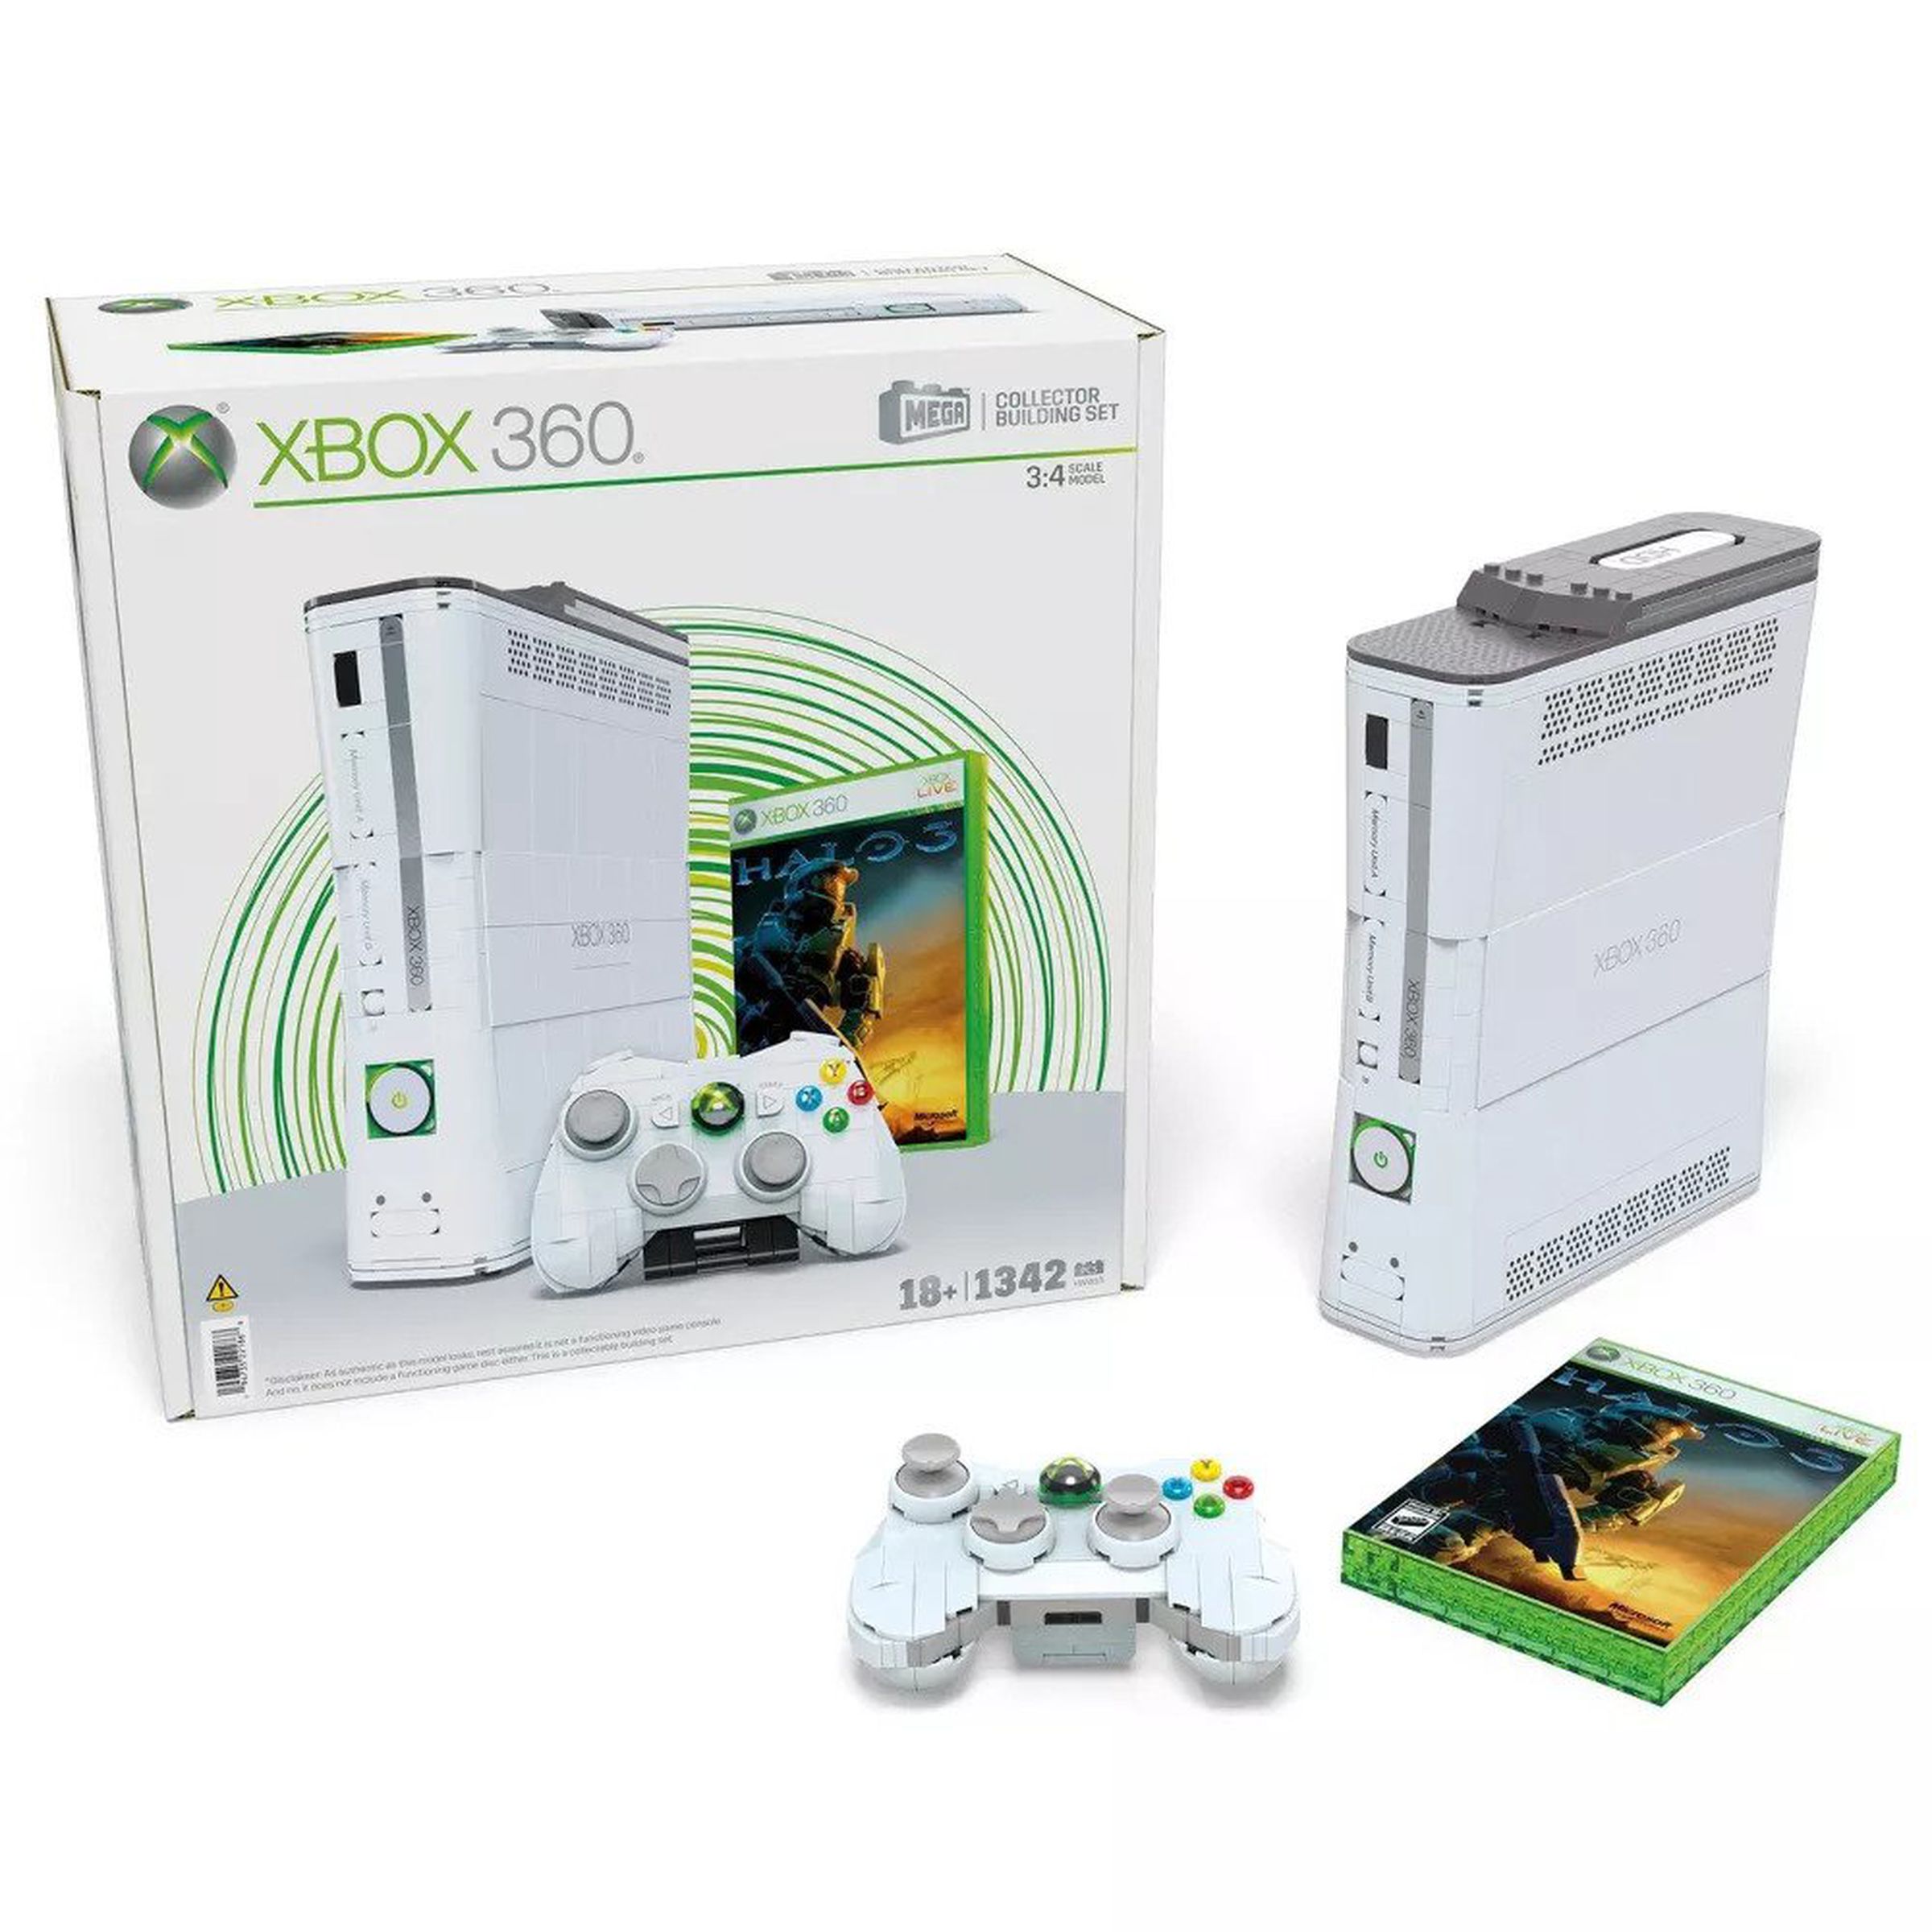 Image of the full Mega Xbox 360 replica set featuring the console, the box, a controller, and a copy of Halo 3.